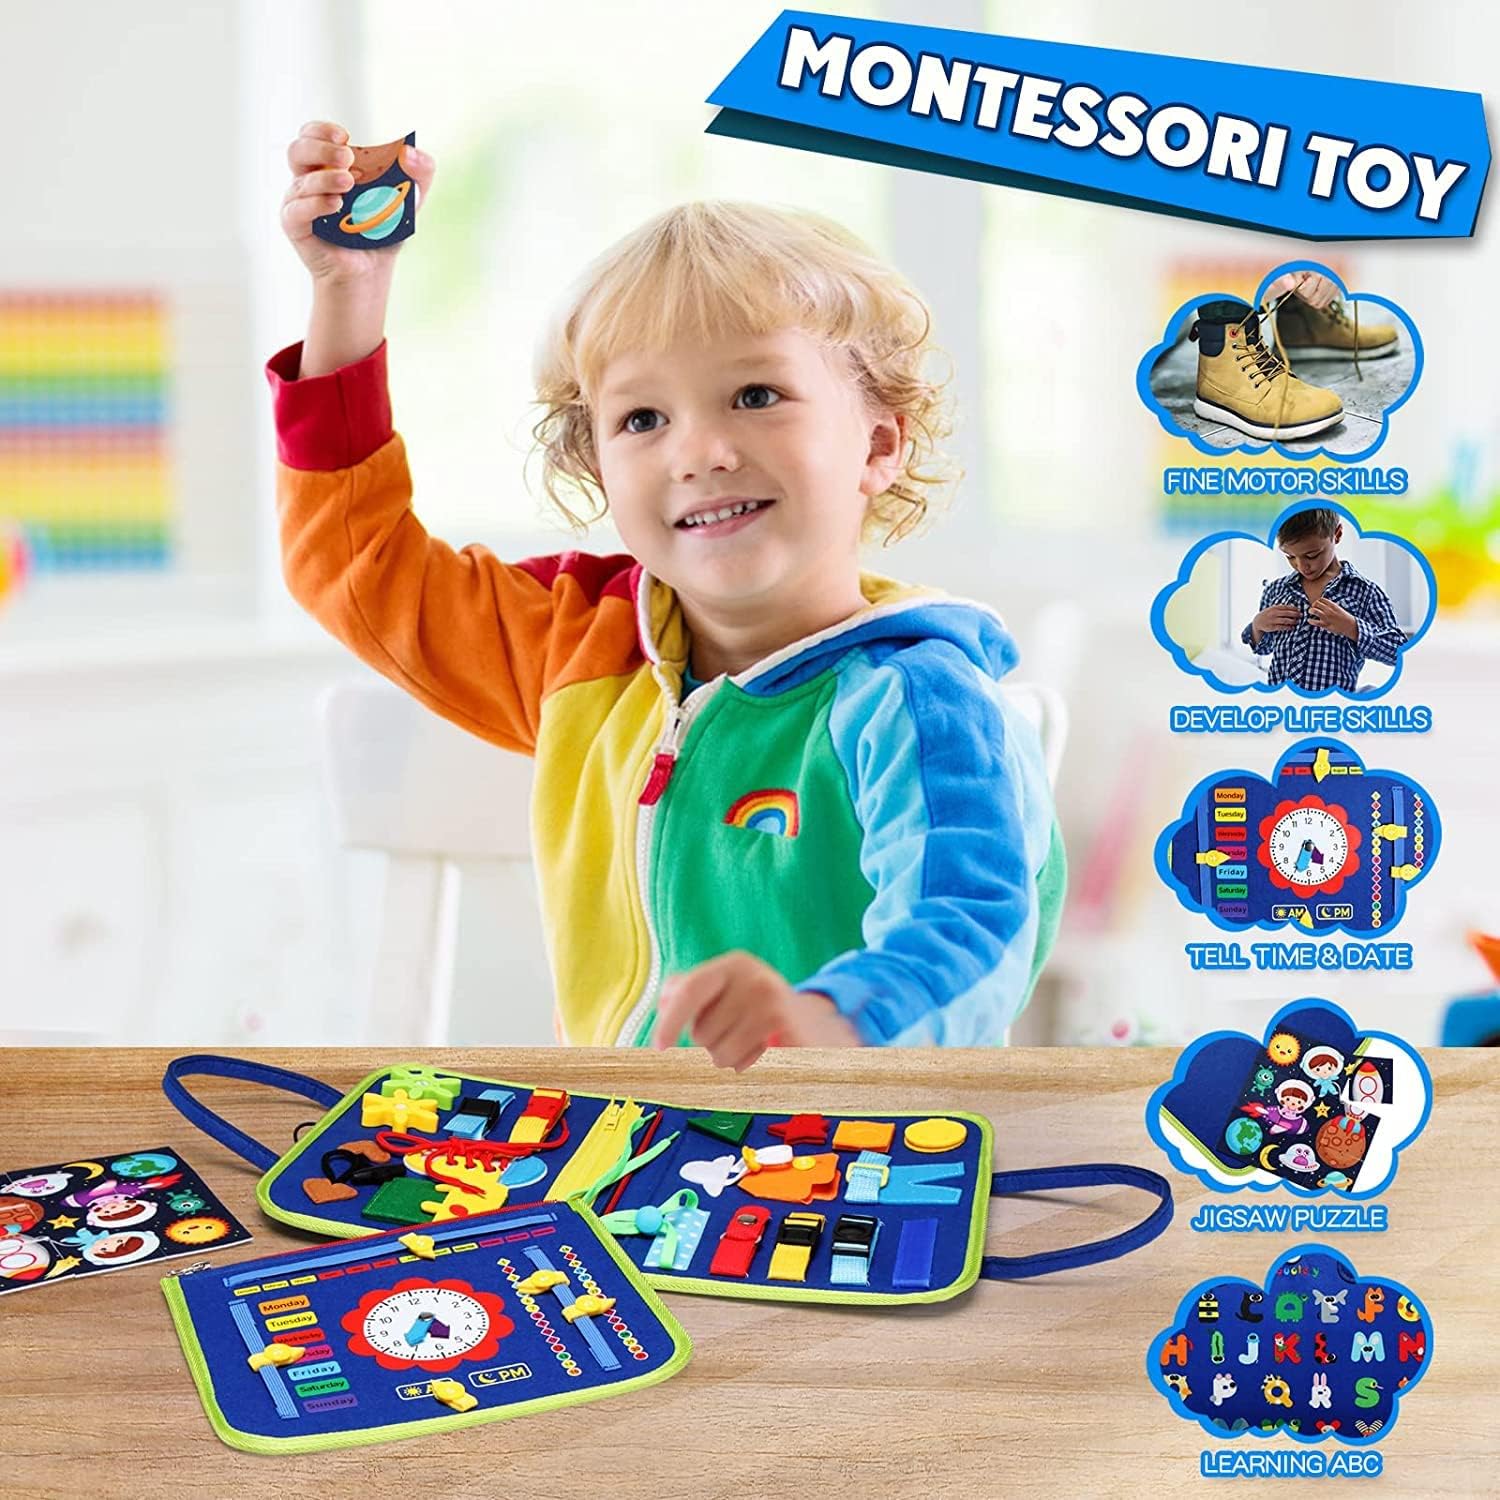 Busy Board Montessori Toy for 1 2 3 4 Years Old, Educational Activity Sensory Board Preschool Learning Fine Motor Skills Toys, Toddler Travel Toy for Plane Car, Gift for Boys Girls